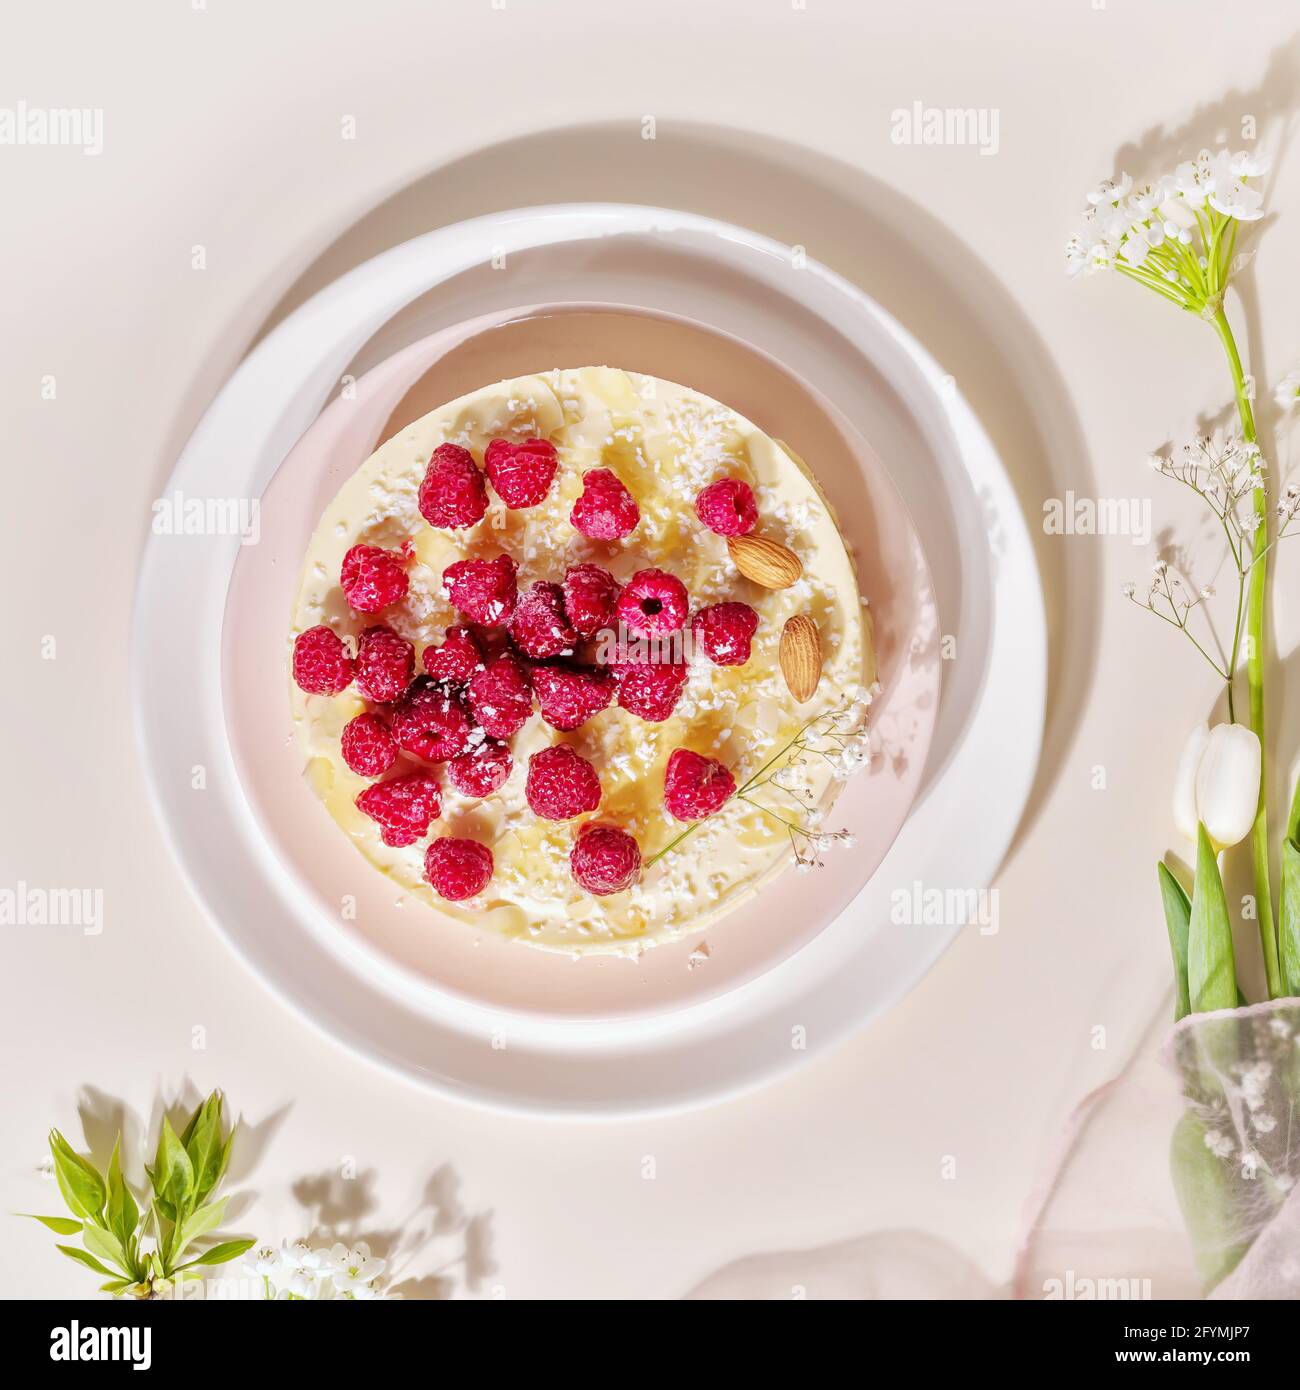 Home made, raspberry, almond cake on a white plate on a pink background. Sweet pastries with almond flour are gluten-free, low in carb. Keto diet Stock Photo